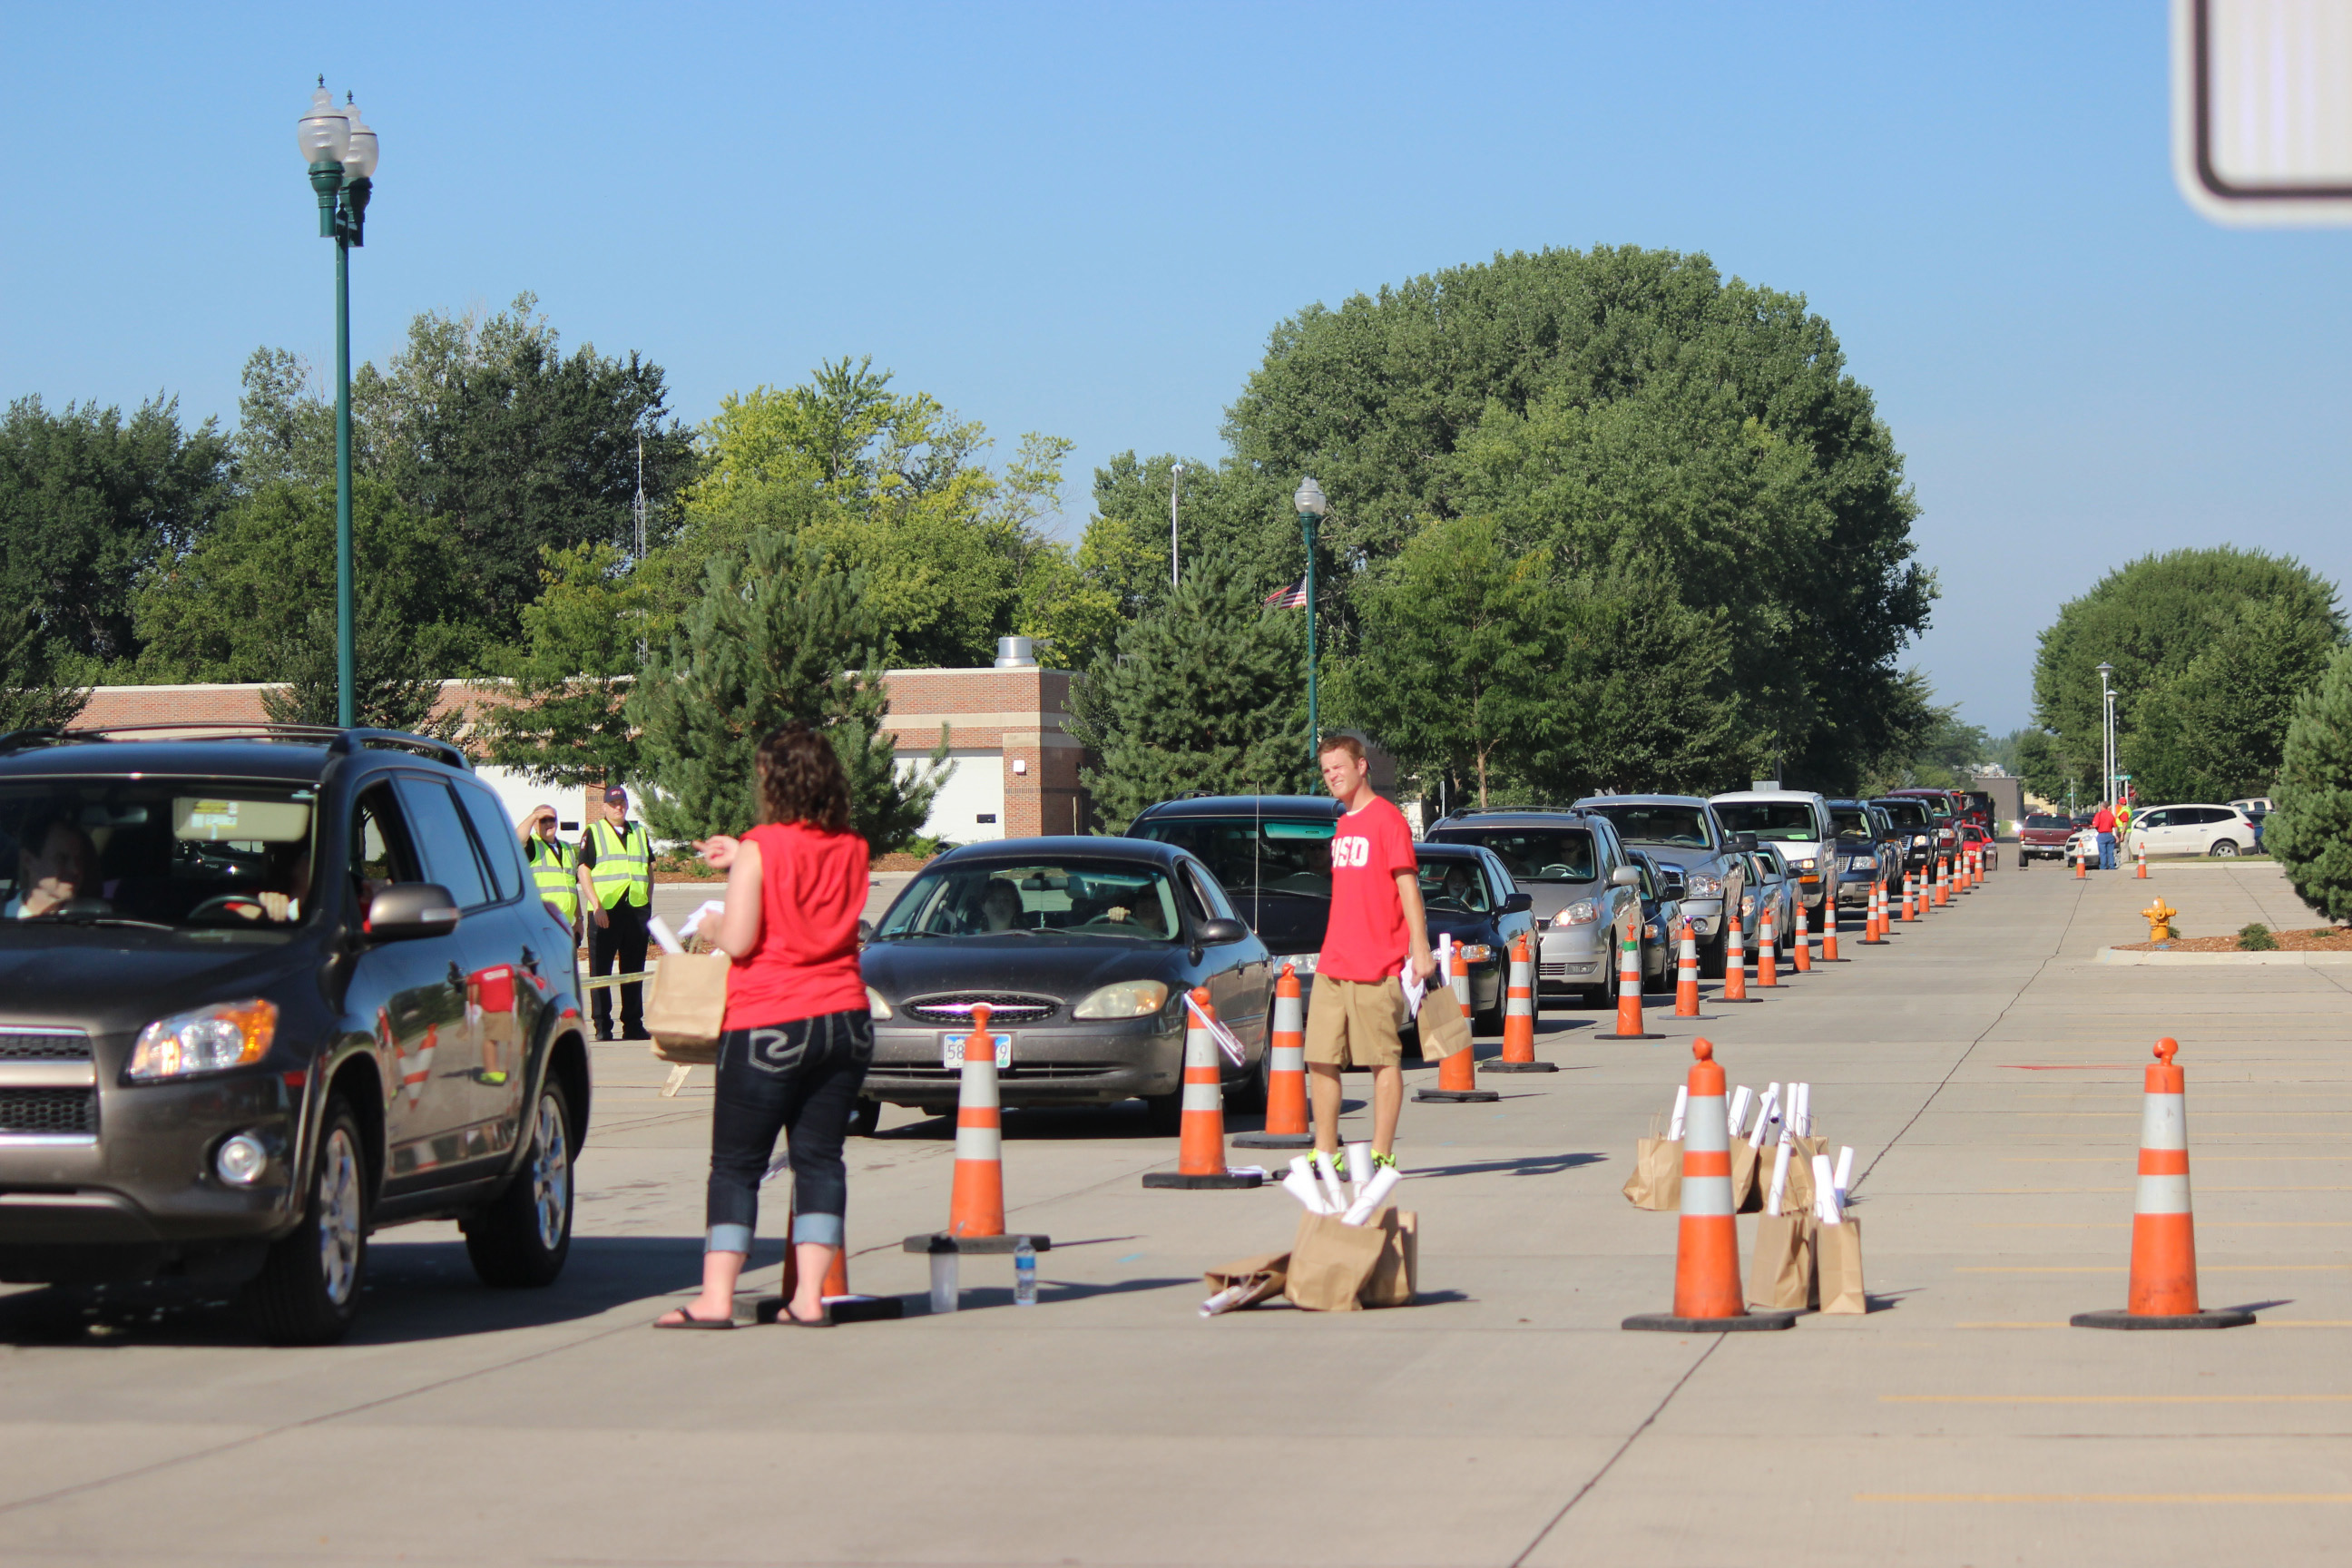 Move-in day 2014: Staff and volunteers greet new and returning students